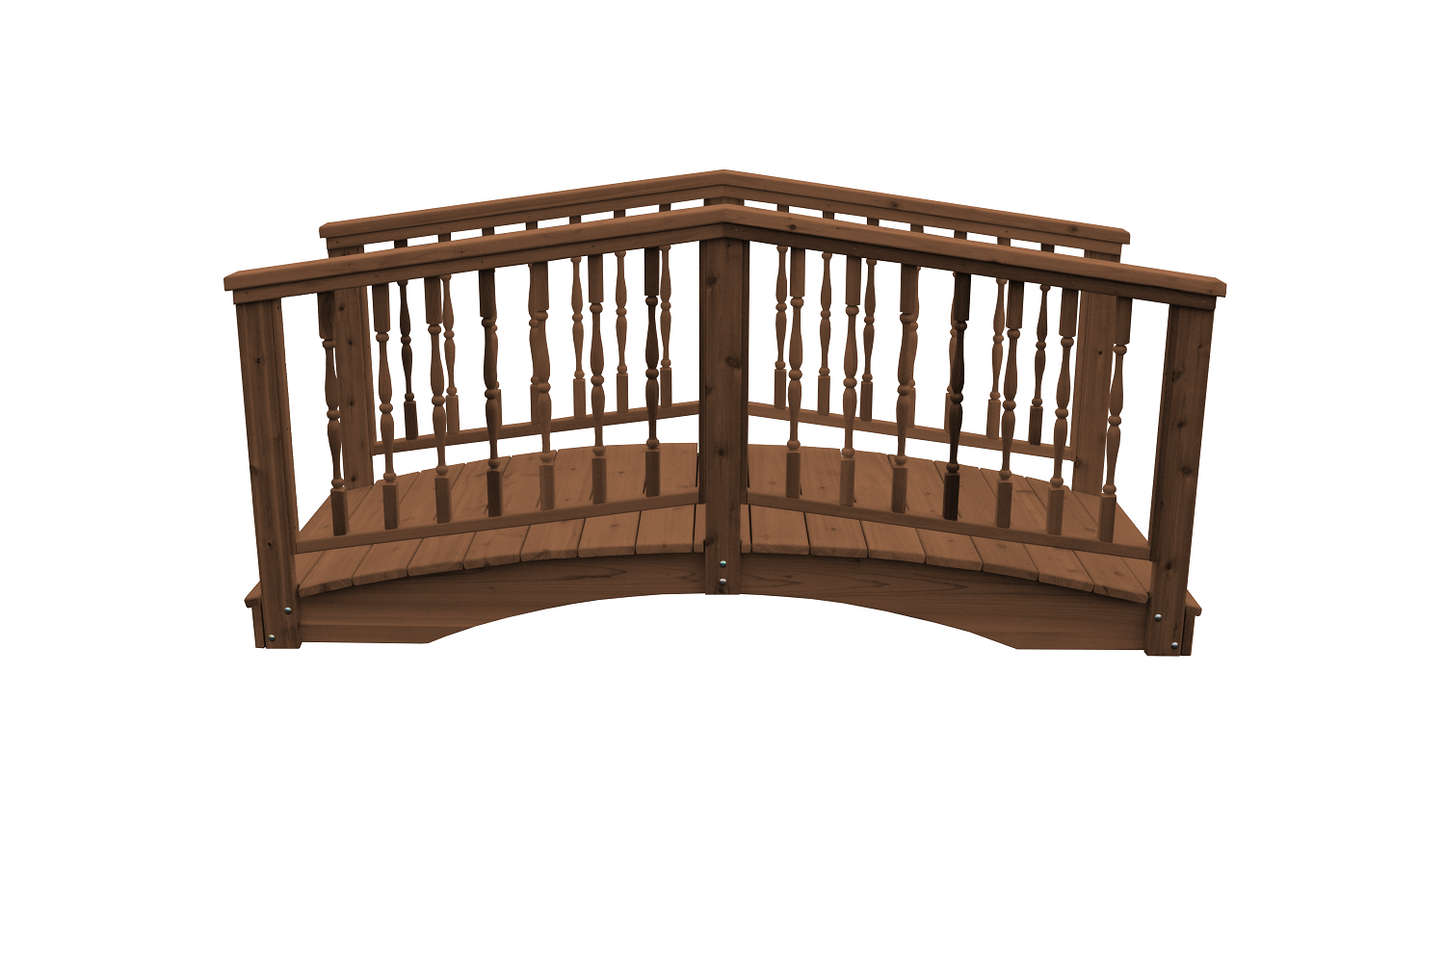 A&L Furniture Co. Western Red Cedar 3' x 12' Spindle Bridge - LEAD TIME TO SHIP 4 WEEKS OR LESS